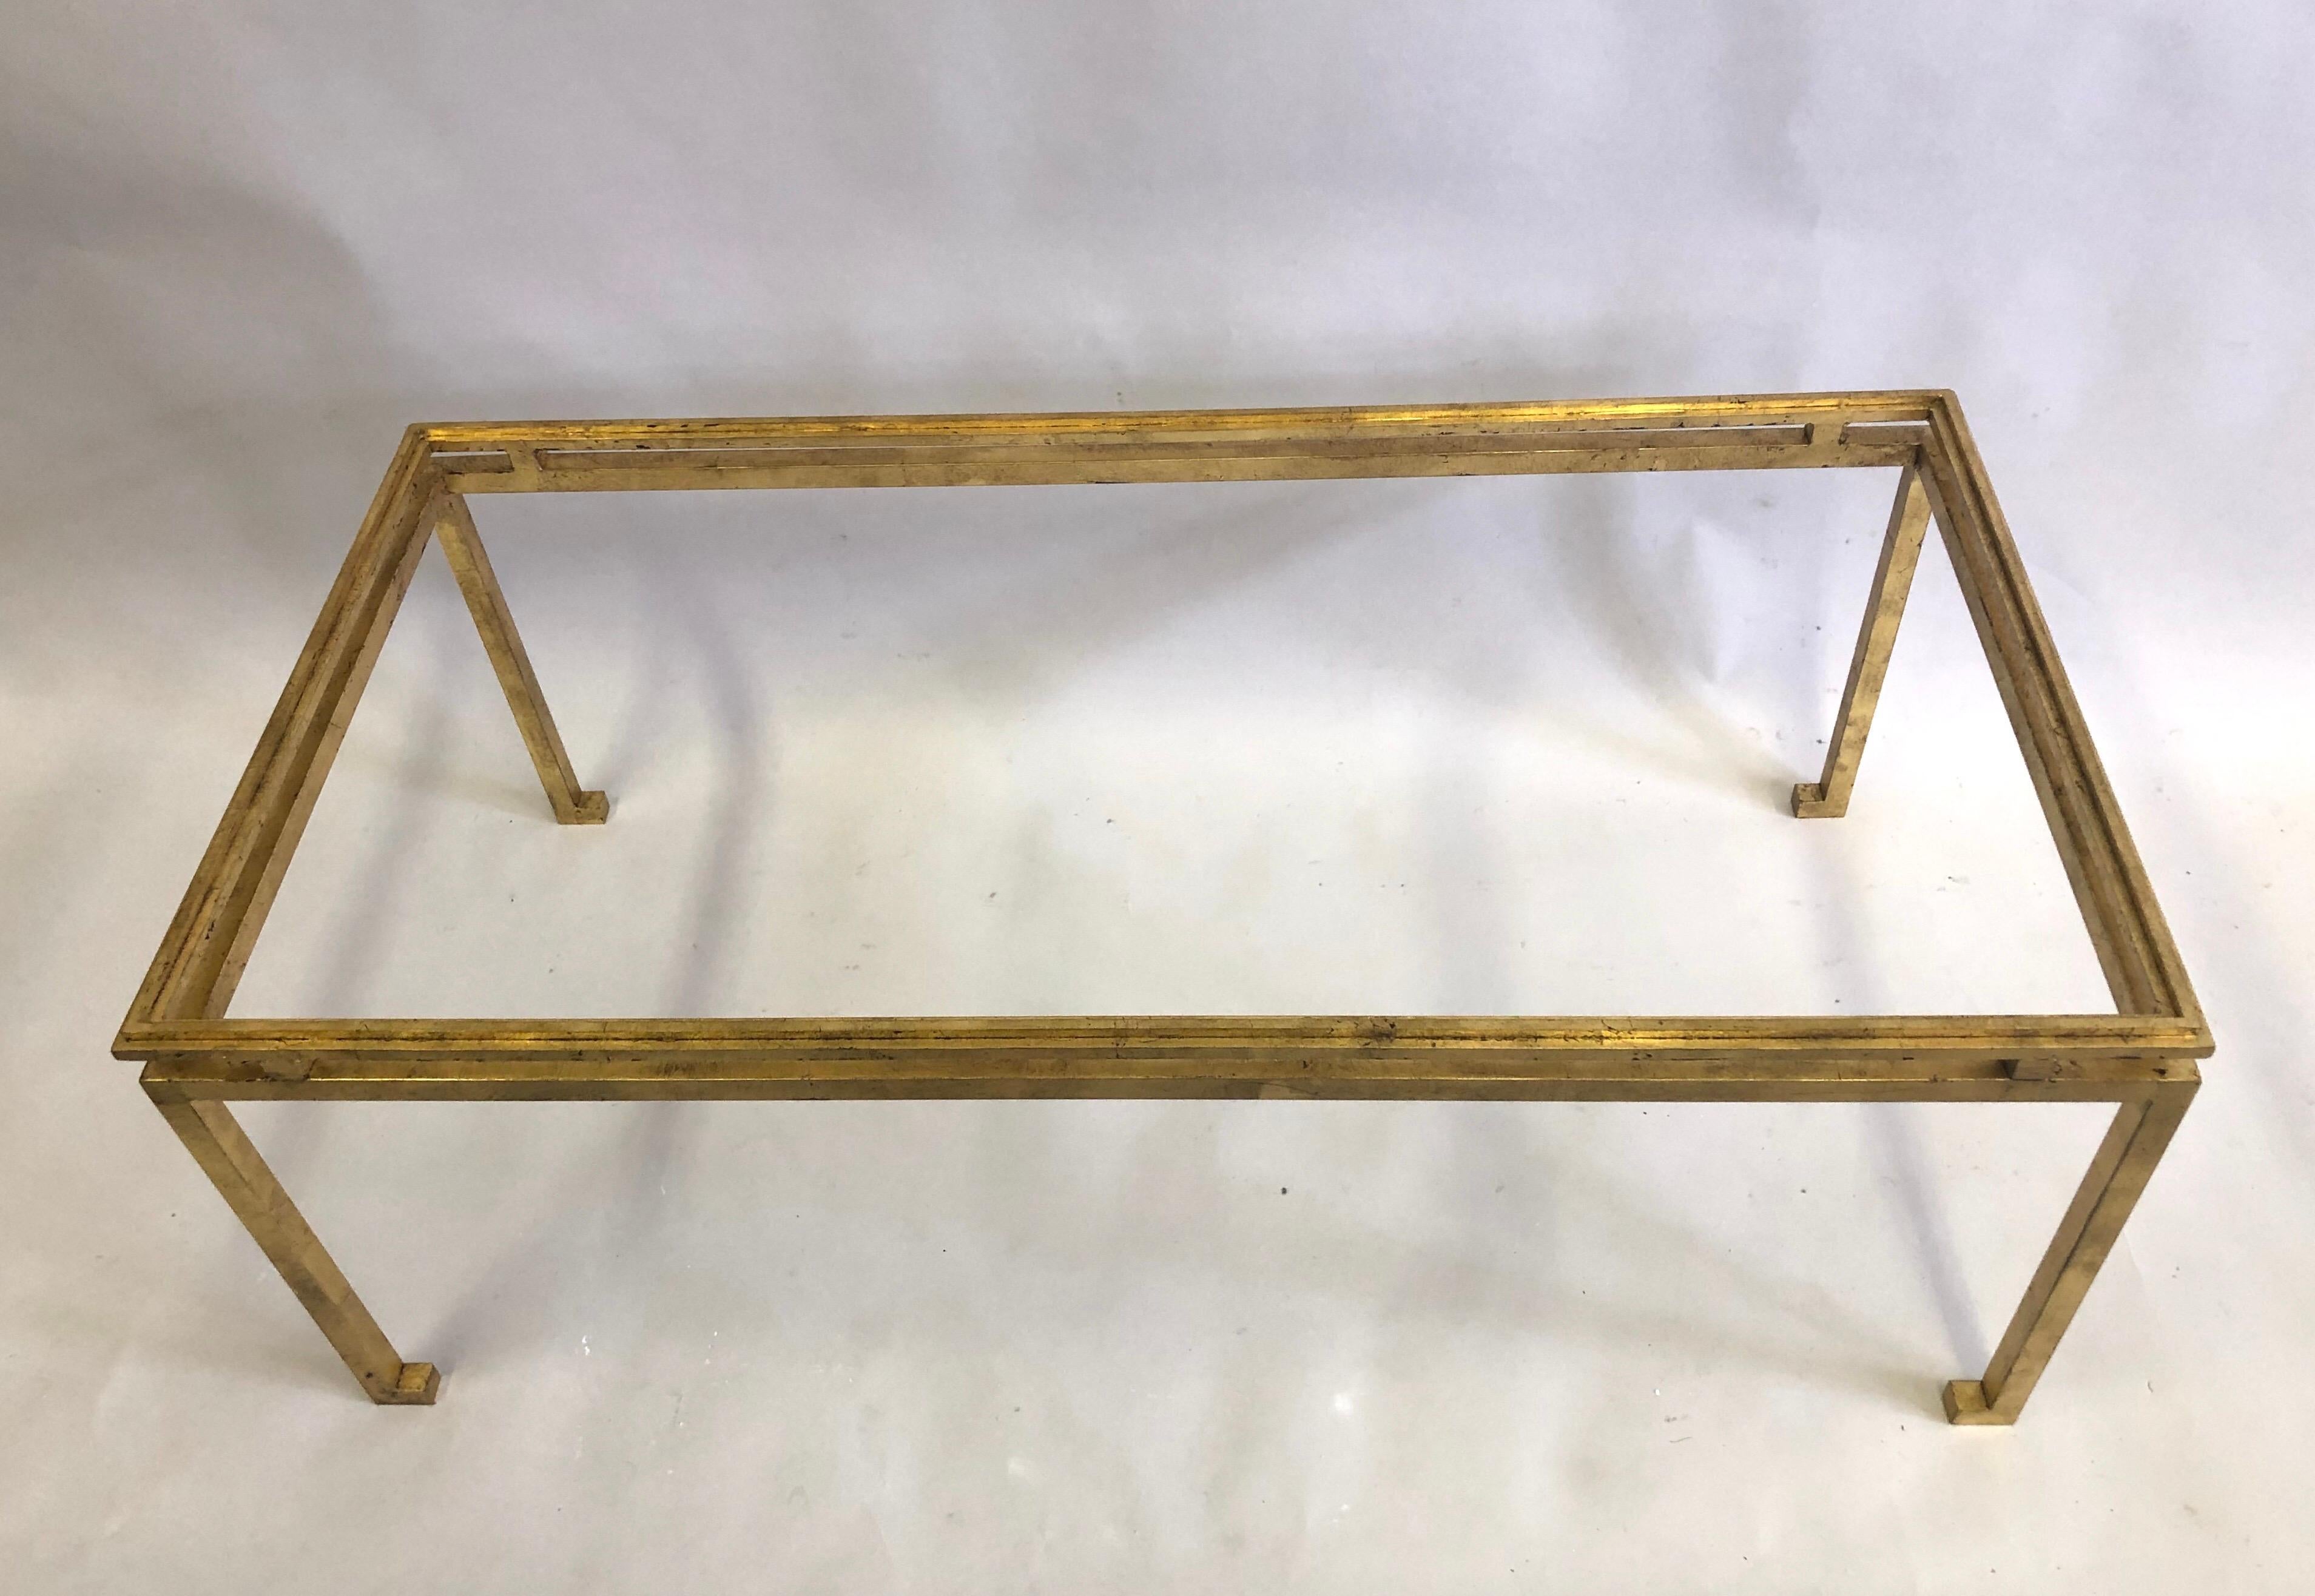 French Mid-Century Modern Neoclassical, Gilt Iron Coffee Table by Maison Ramsay For Sale 2